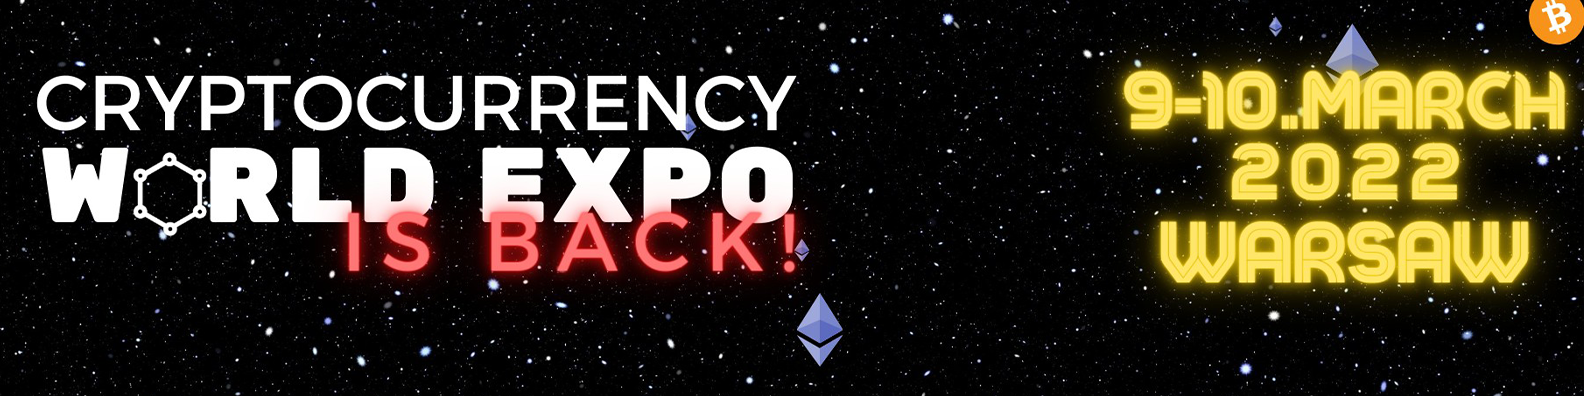 Cryptocurrency World Expo, Warsaw Summit 2022 with an exclusive touch organized by Cryptocurrency World Expo